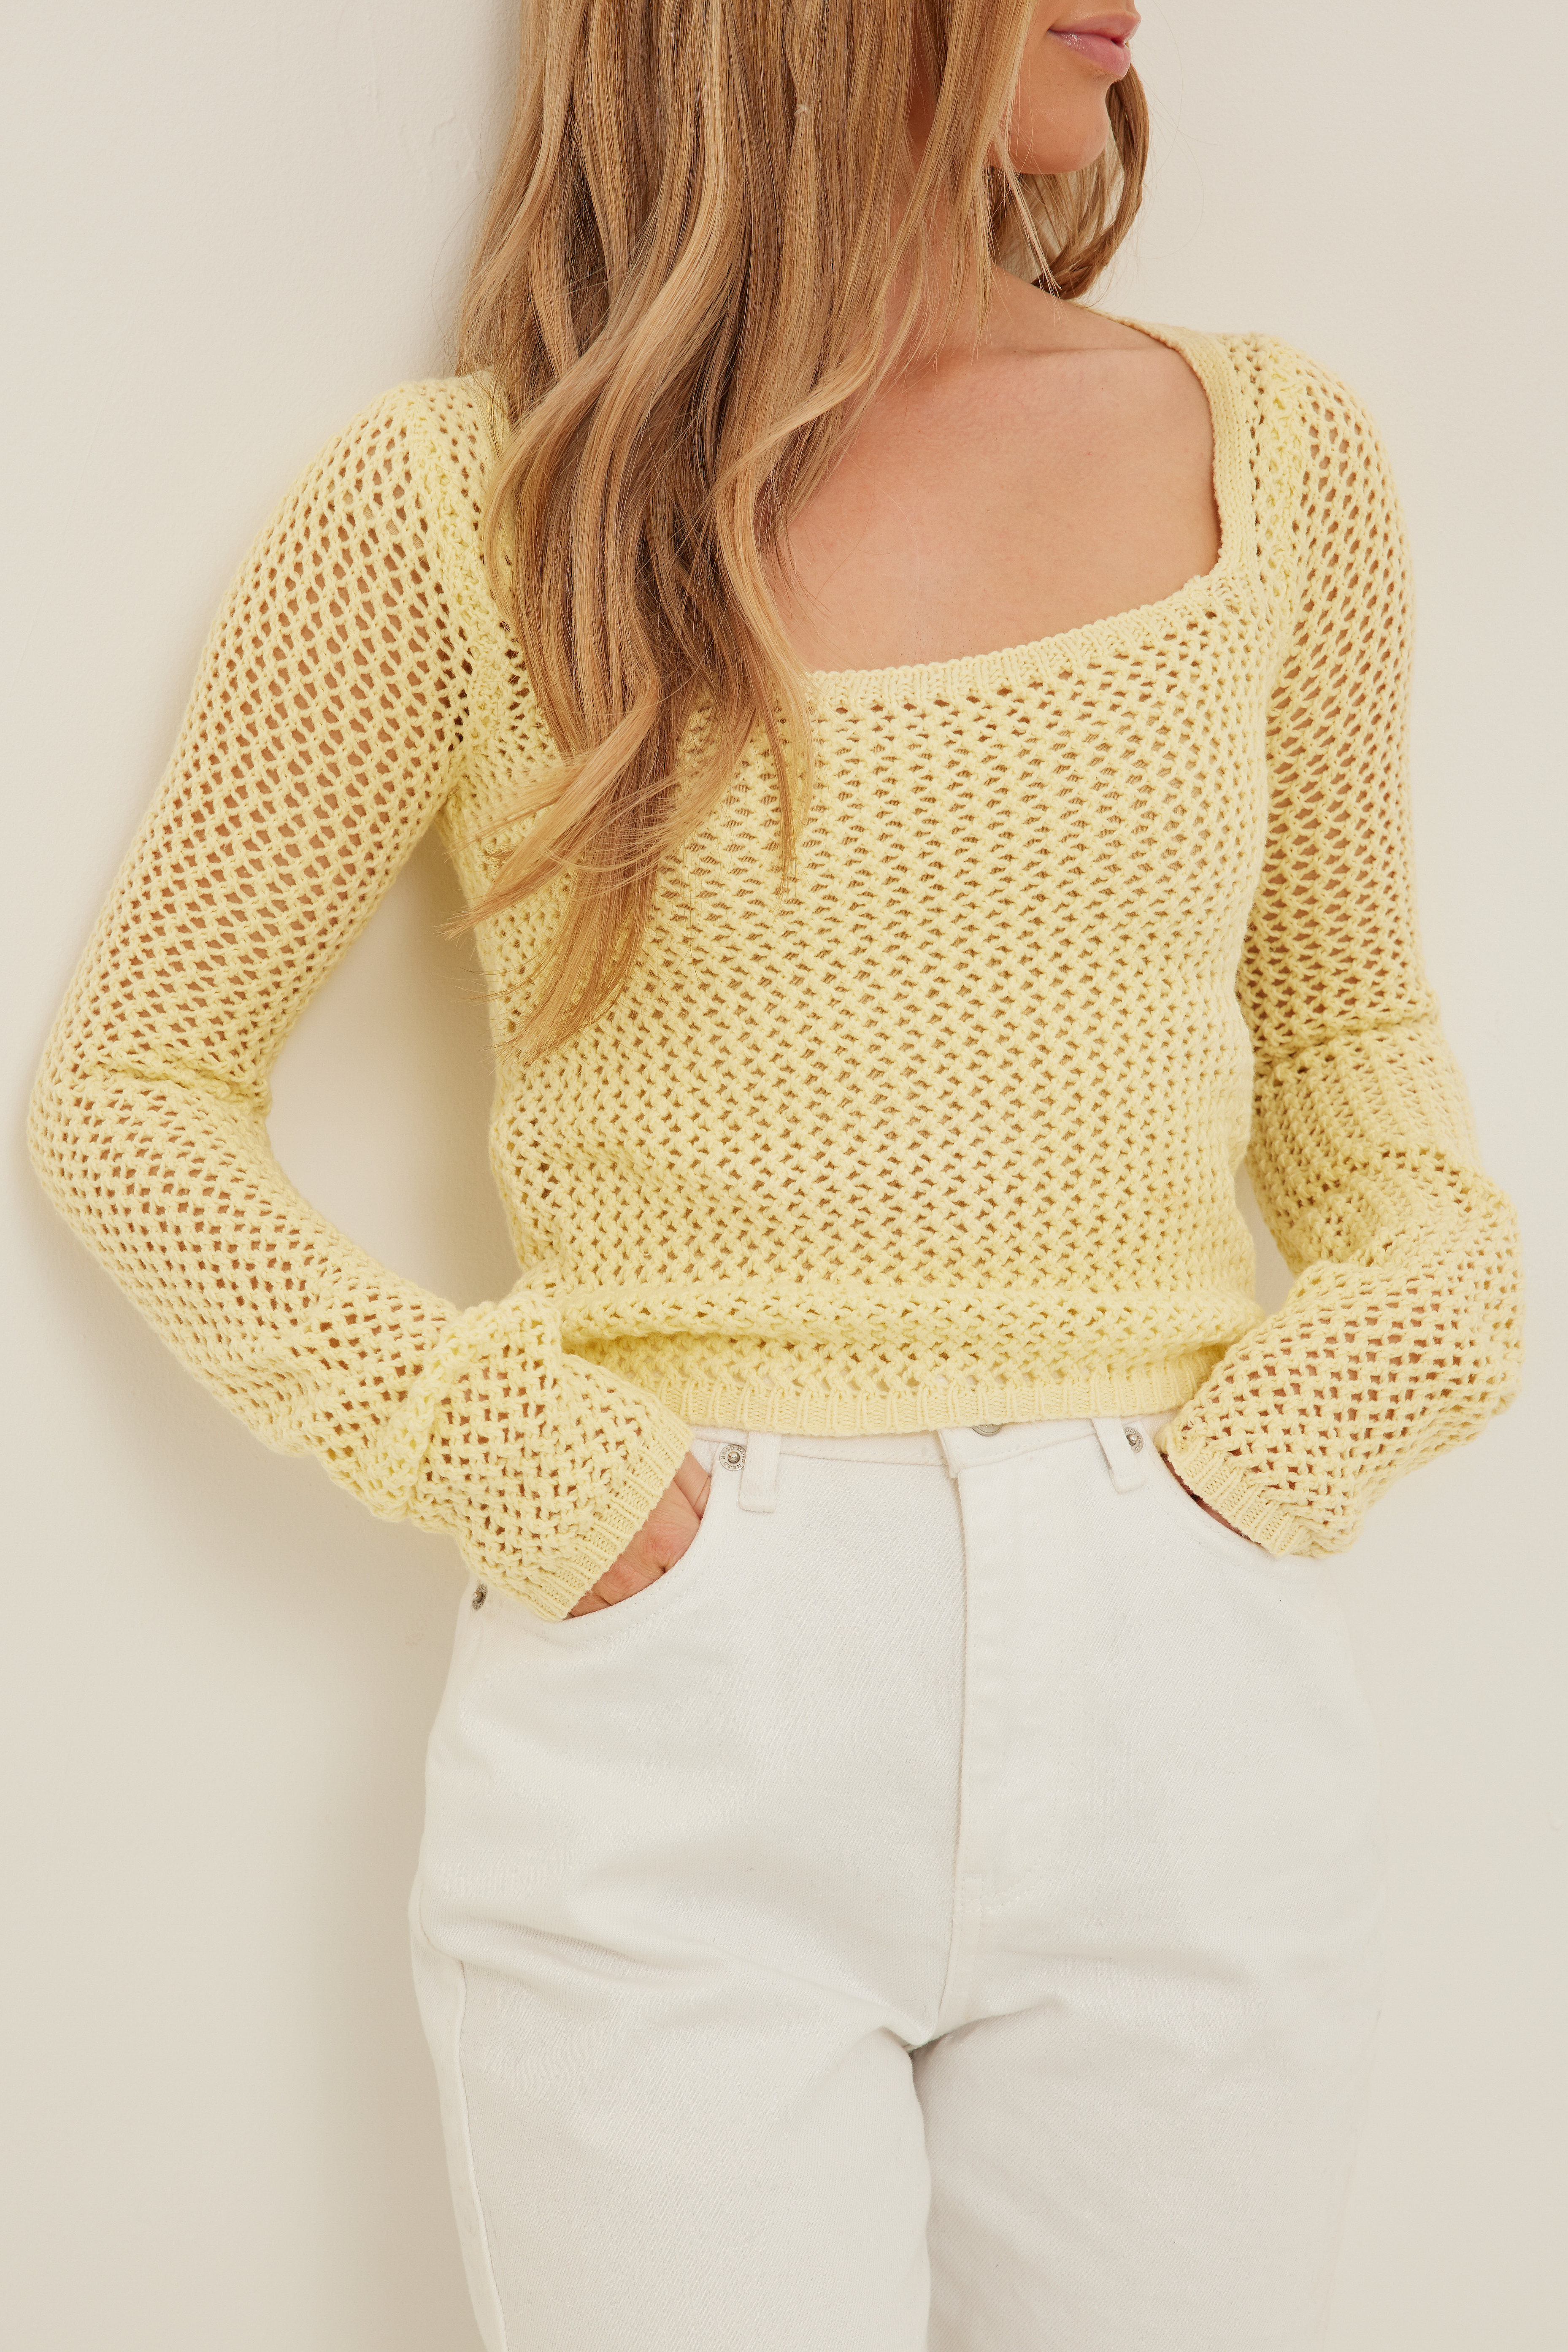 Knitted Square Neck Top Outfit.